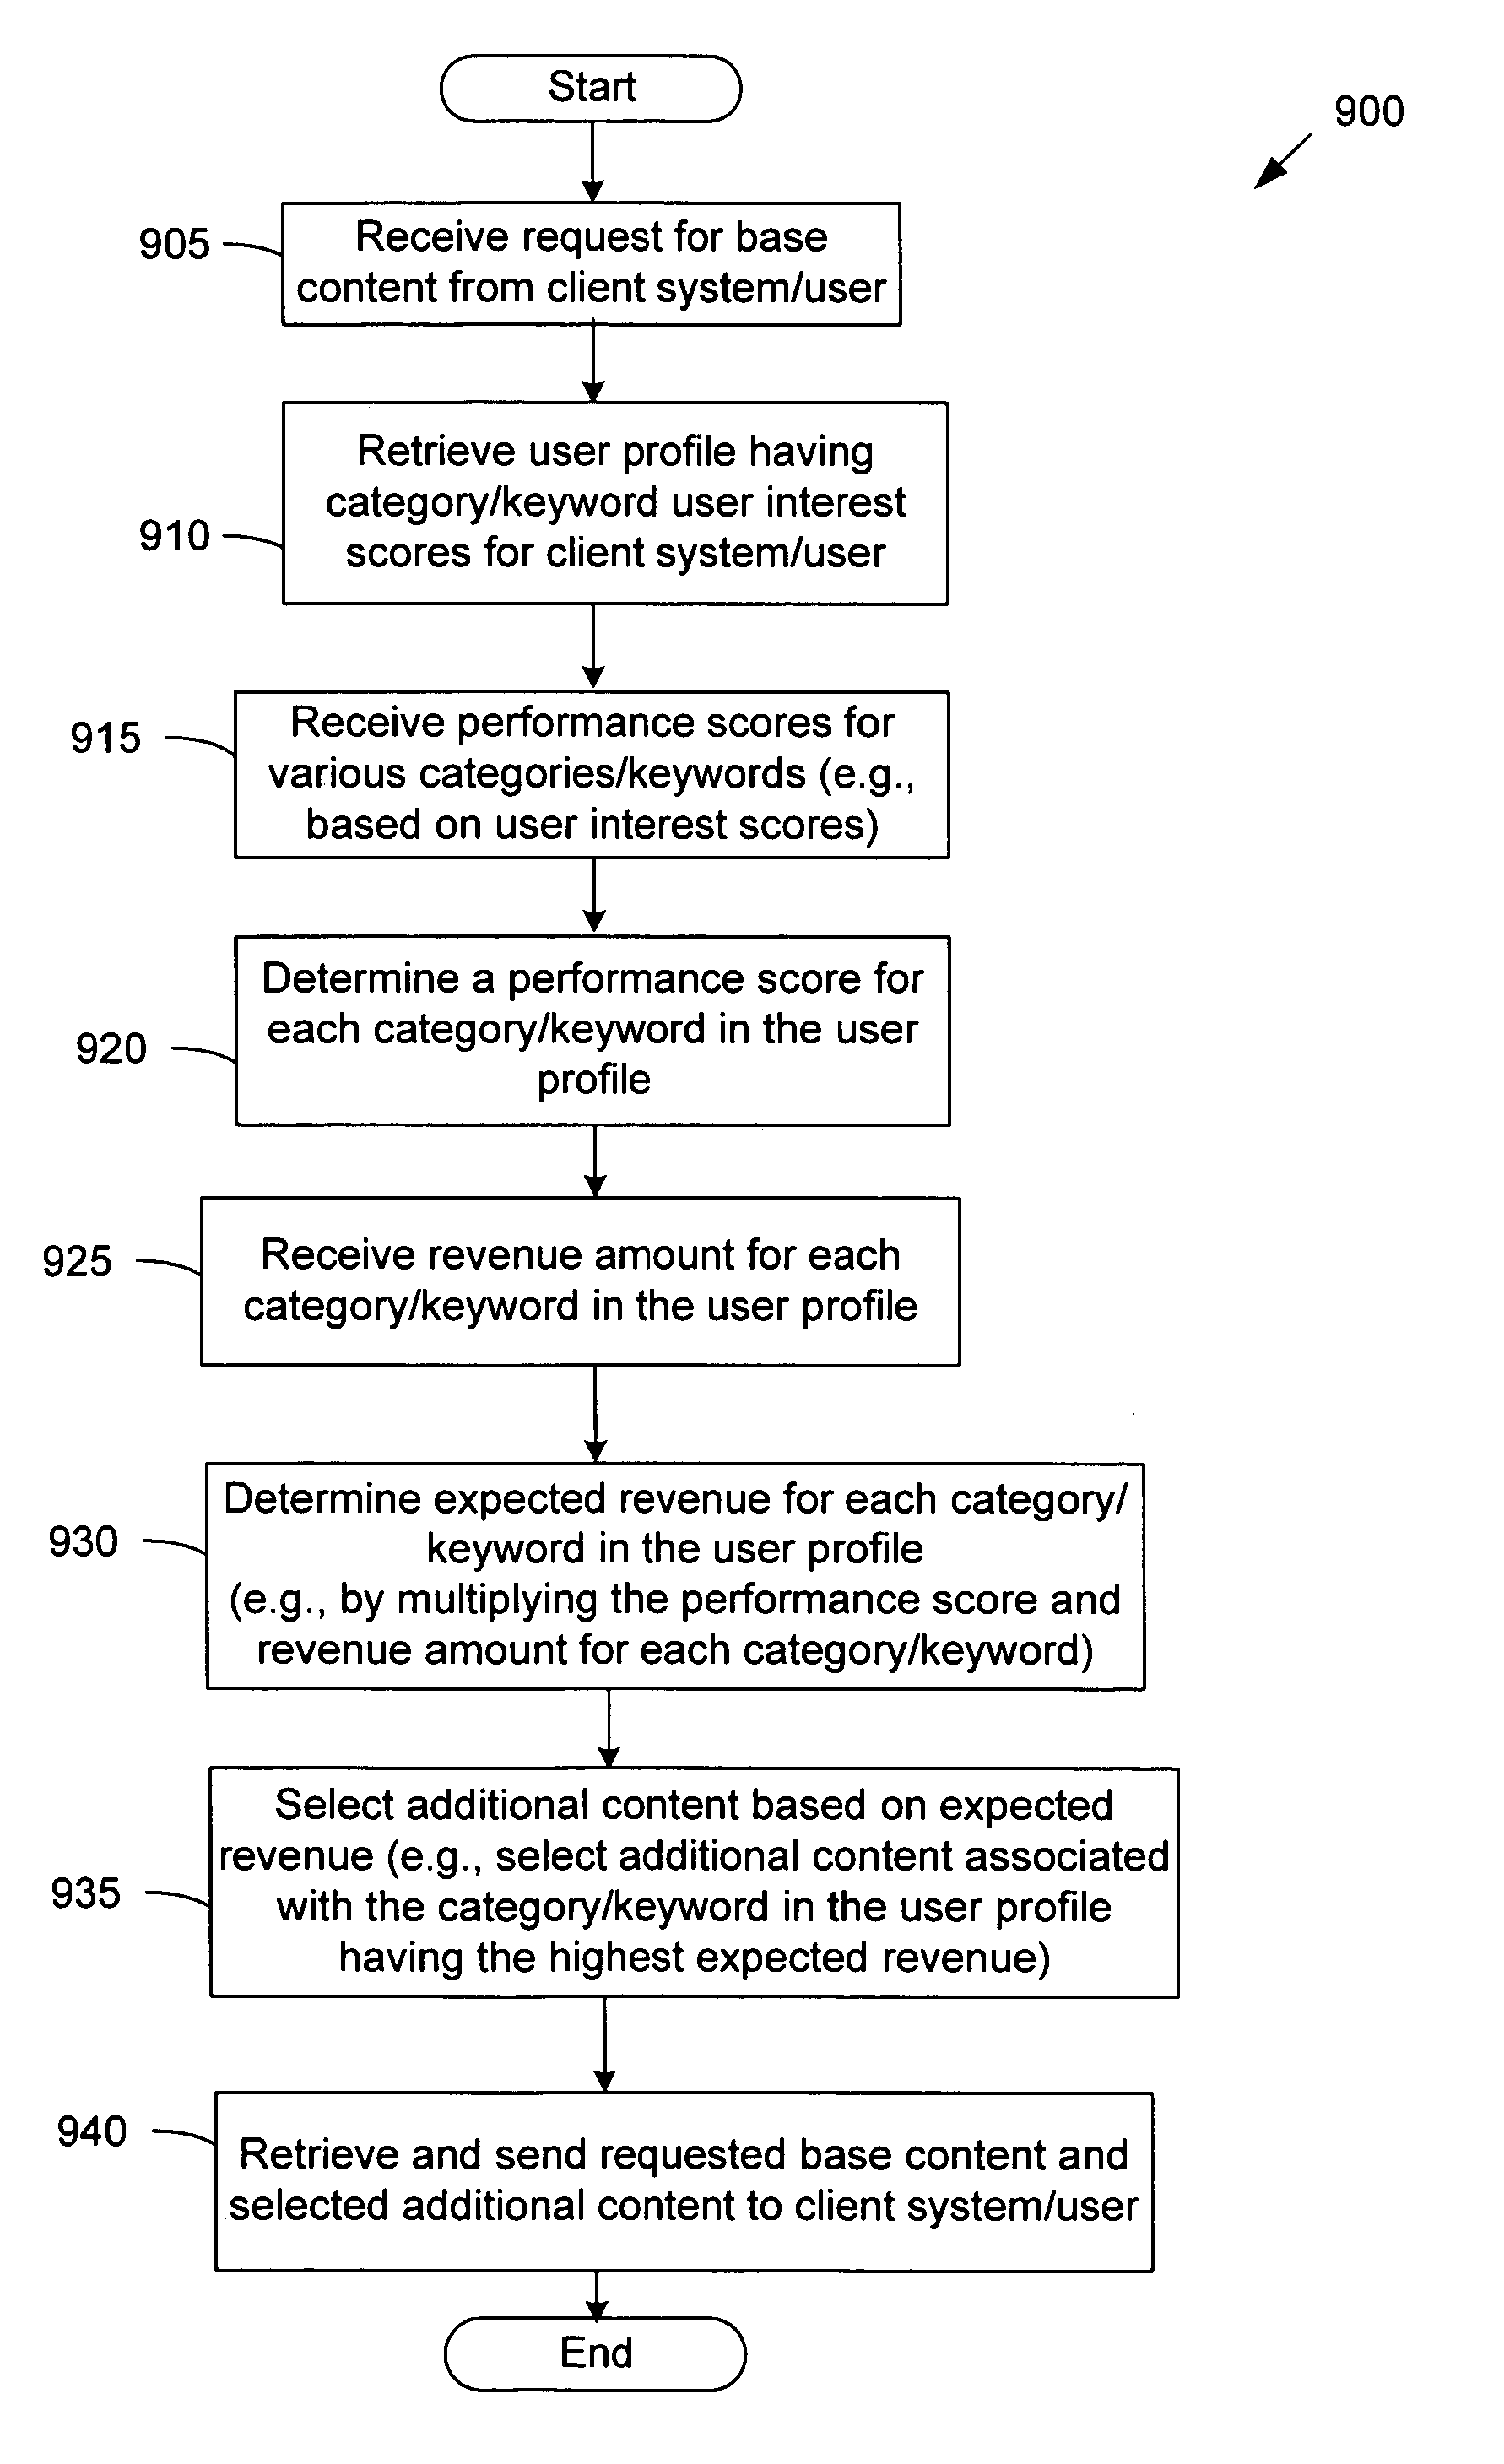 Method and apparatus for selecting advertisements to serve using user profiles, performance scores, and advertisement revenue information